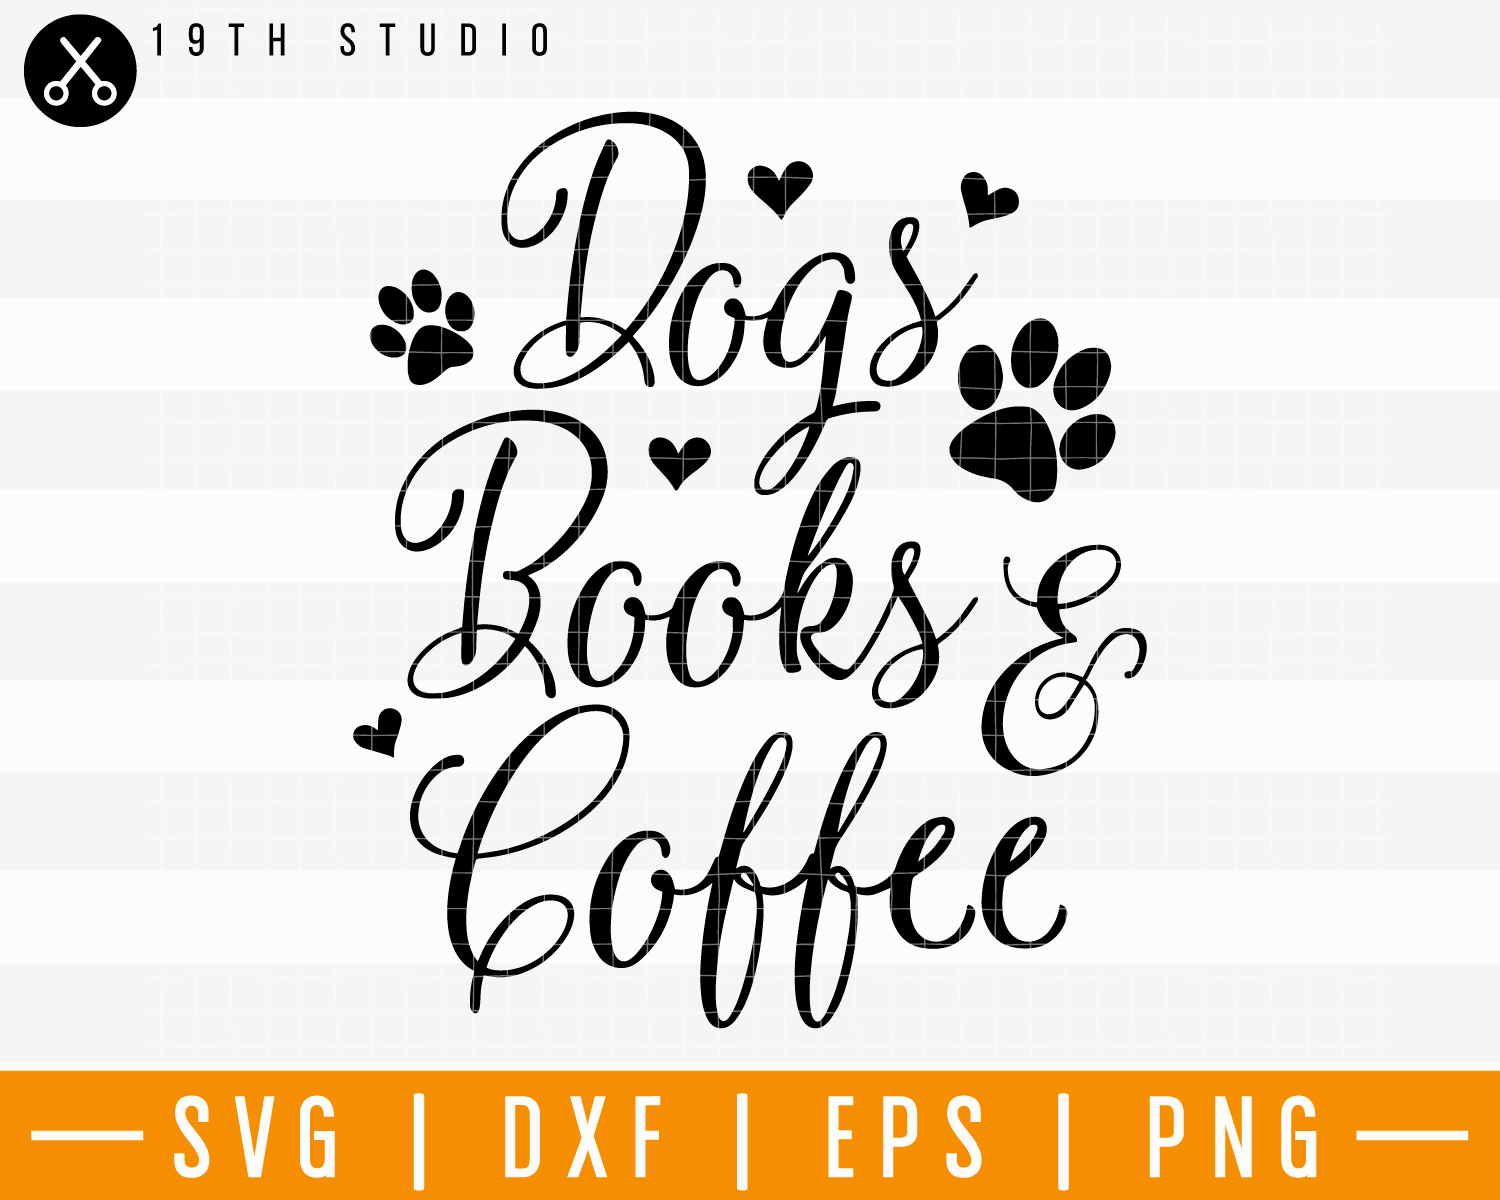 Dogs books and coffee SVG | M25F3 Craft House SVG - SVG files for Cricut and Silhouette